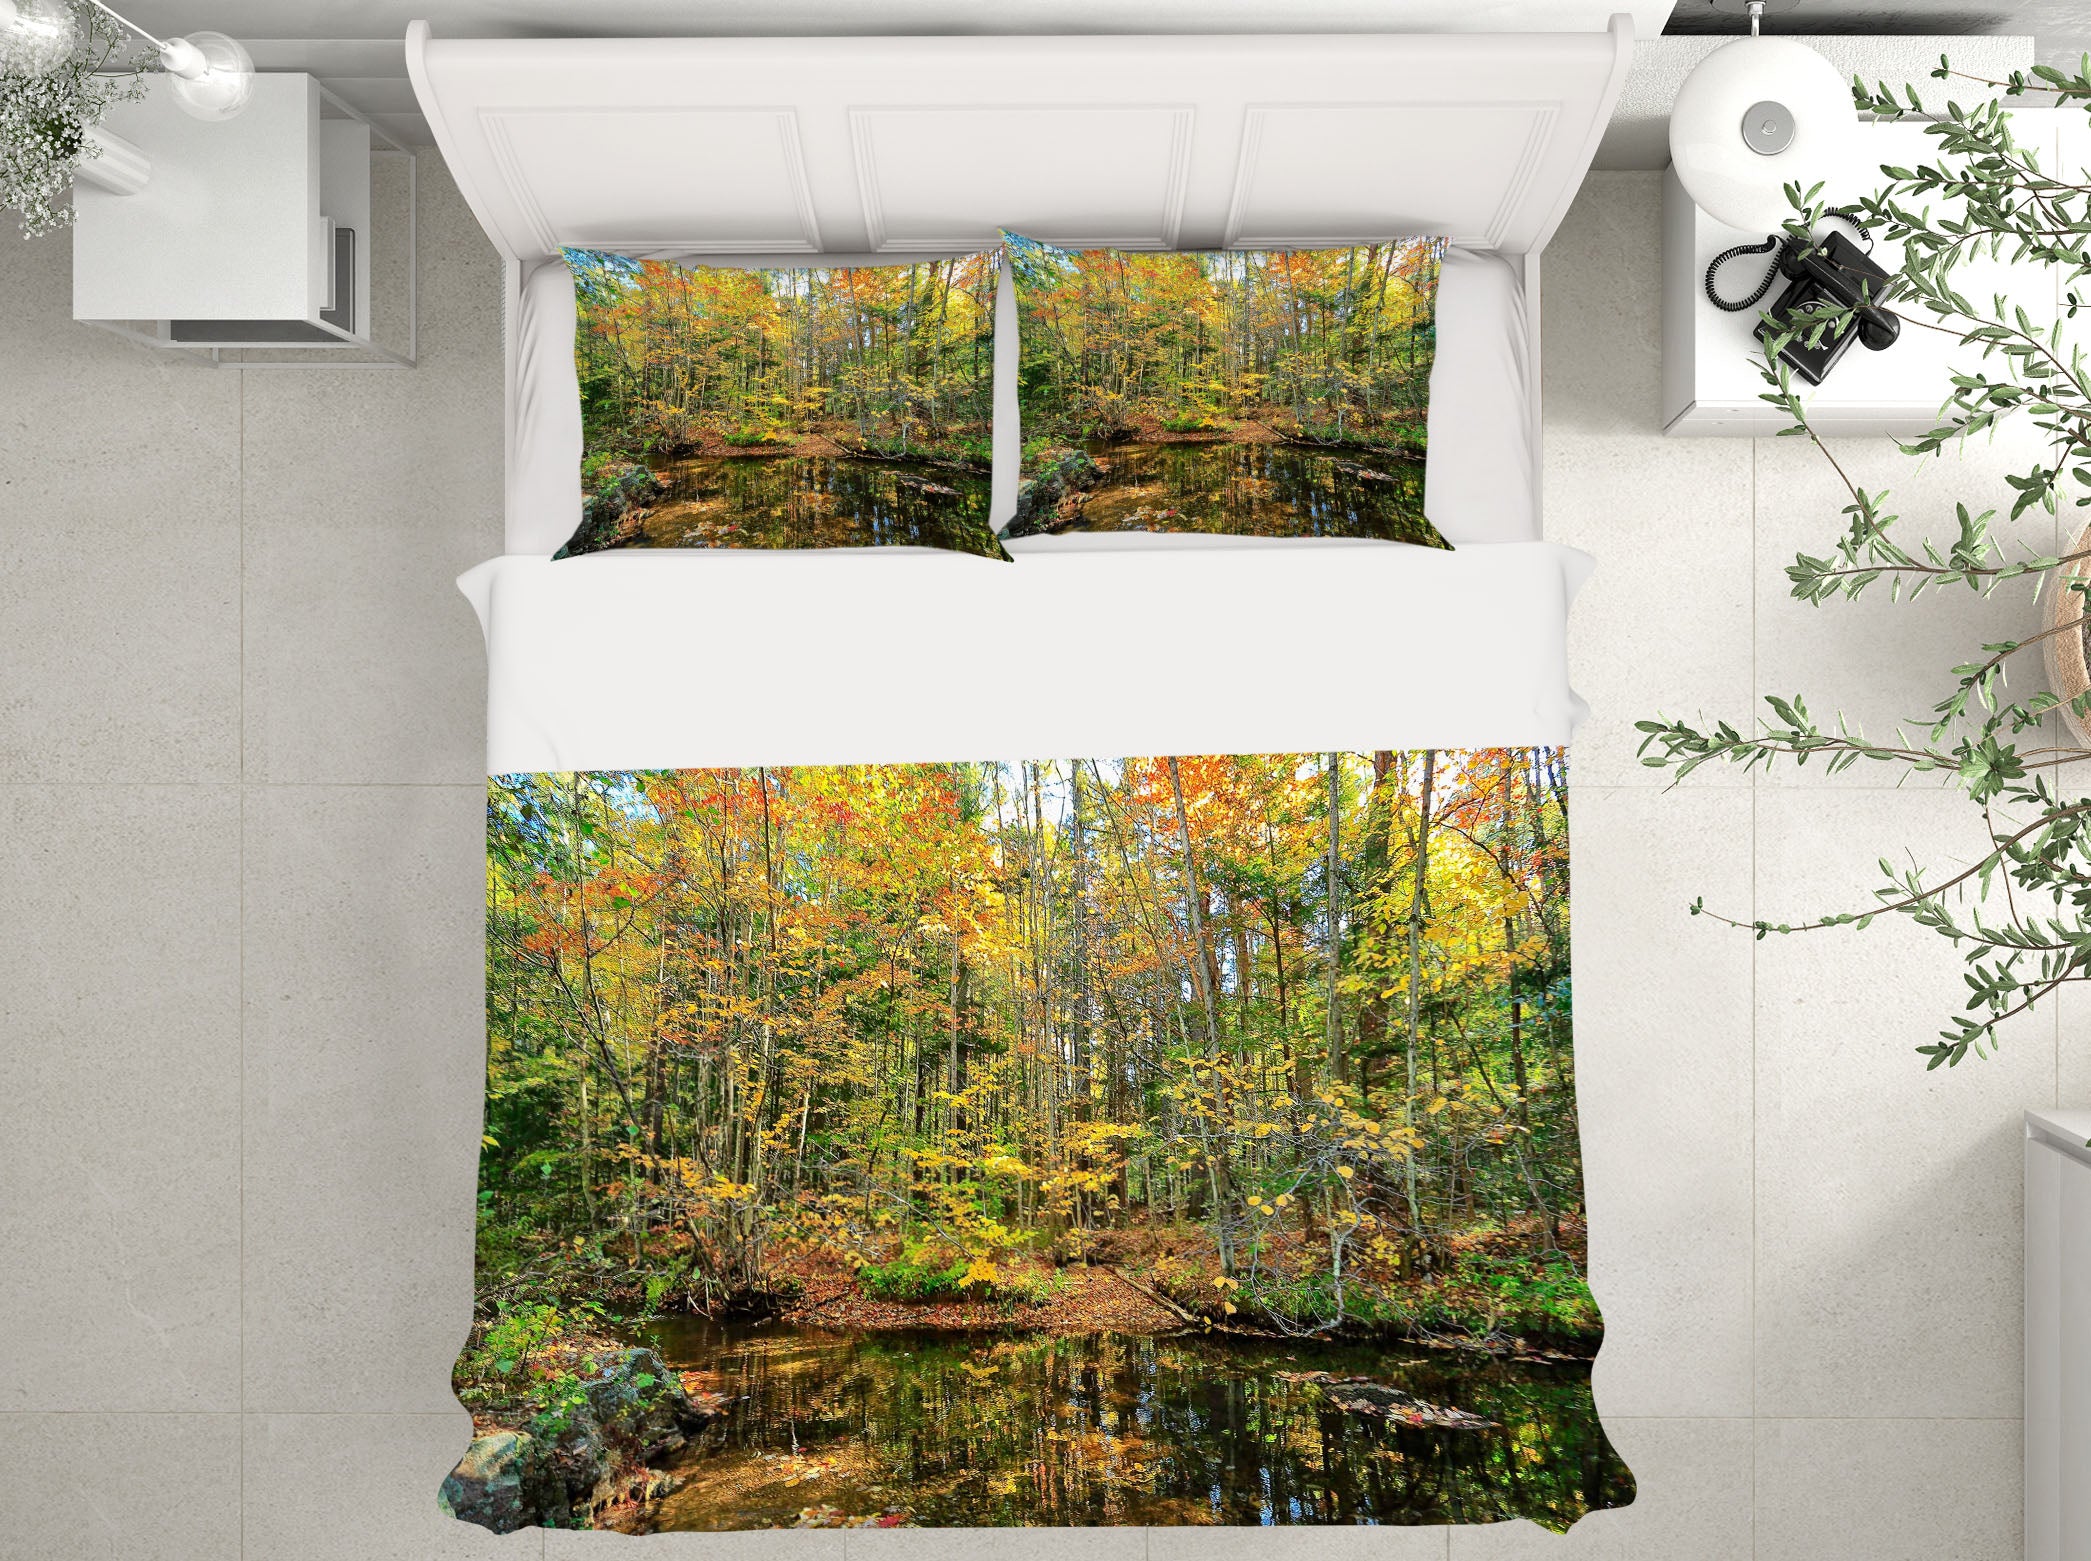 3D Pond Reflections 62192 Kathy Barefield Bedding Bed Pillowcases Quilt